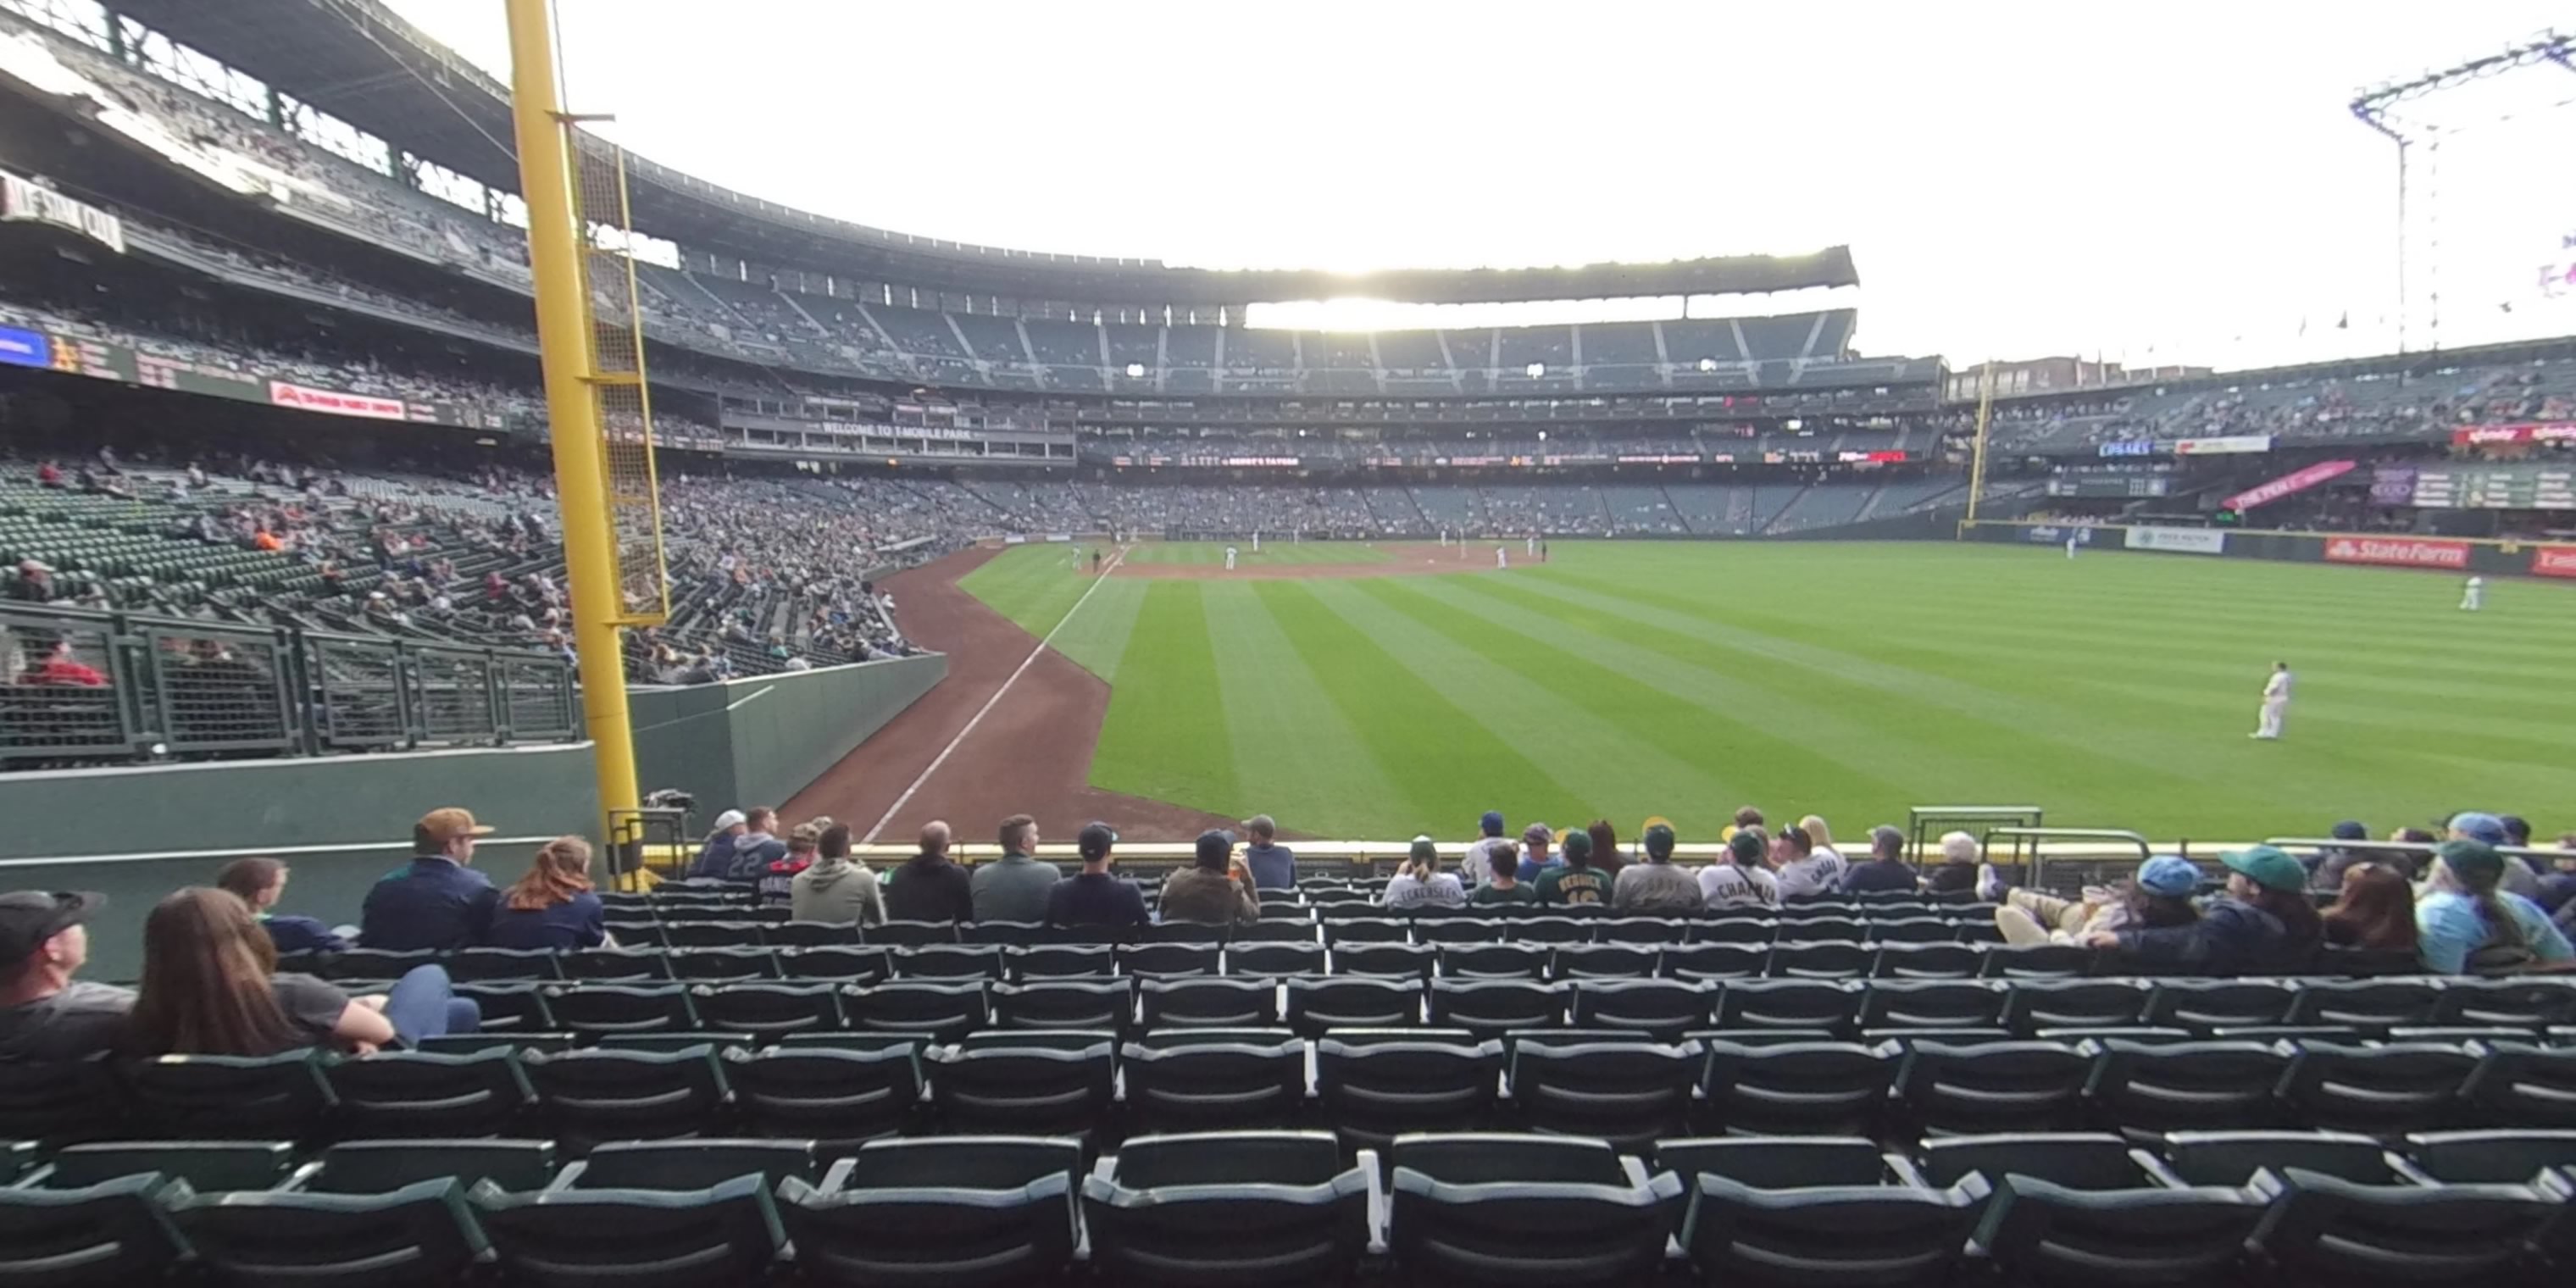 section 109 panoramic seat view  for baseball - t-mobile park